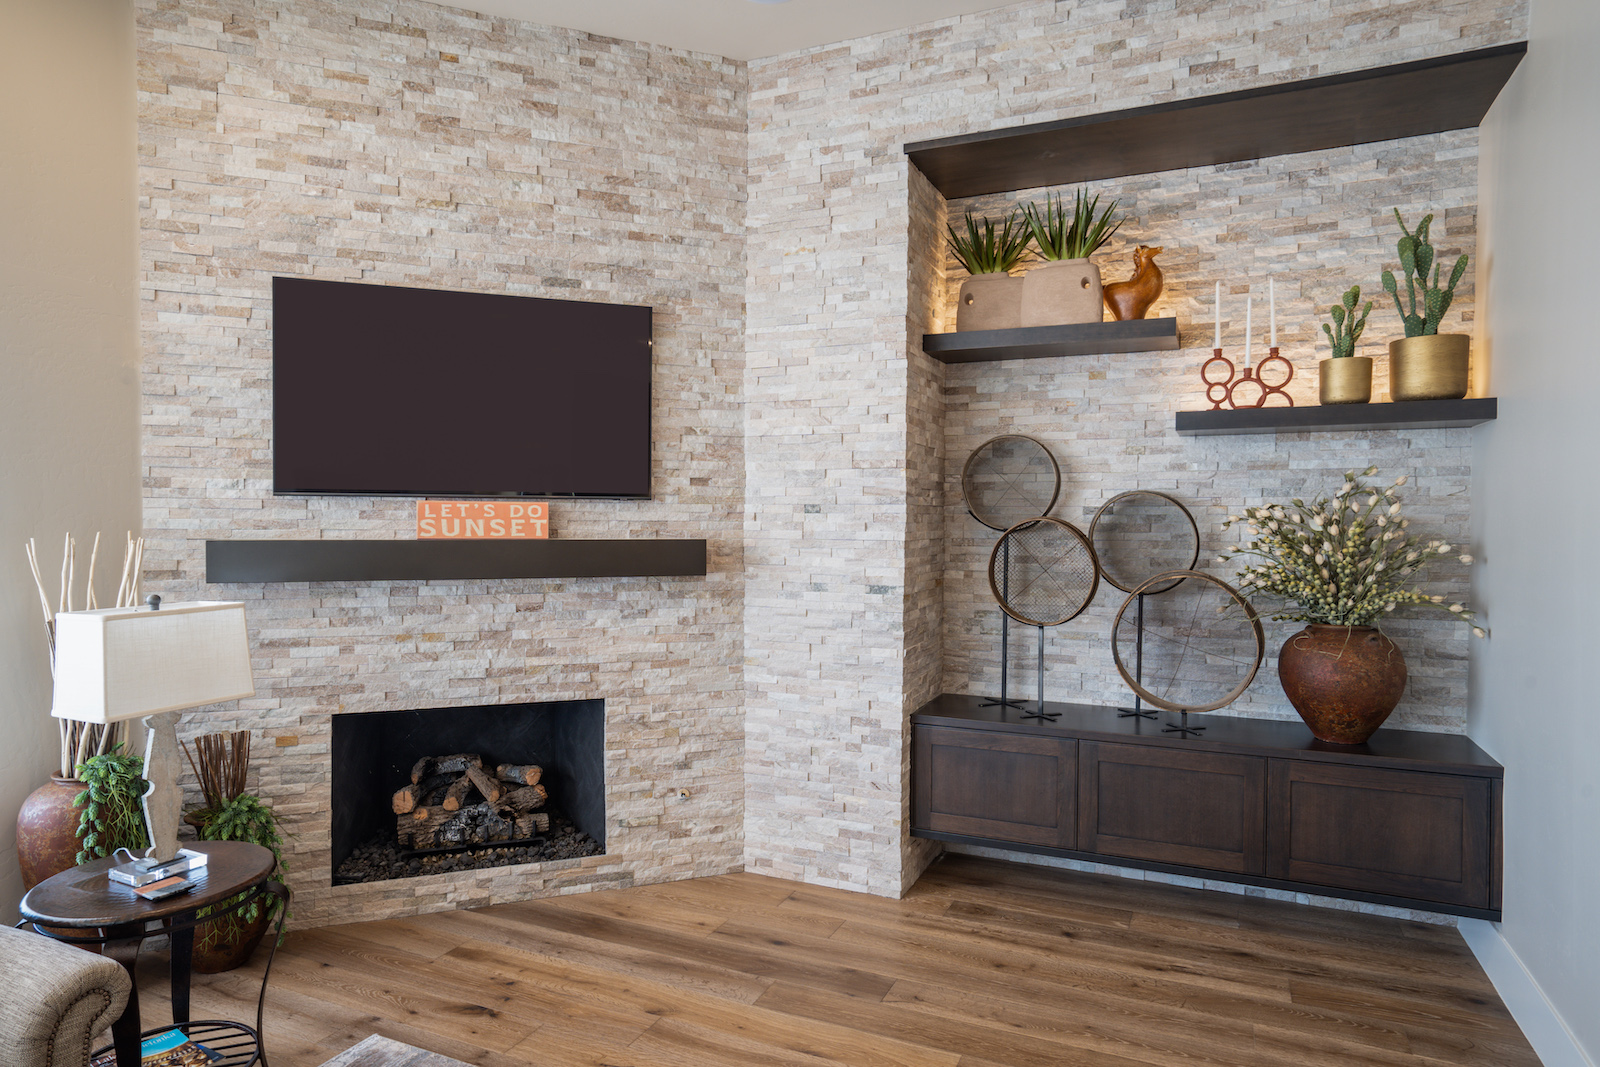 Southwest Home Decor: Adding Warmth to Your Space